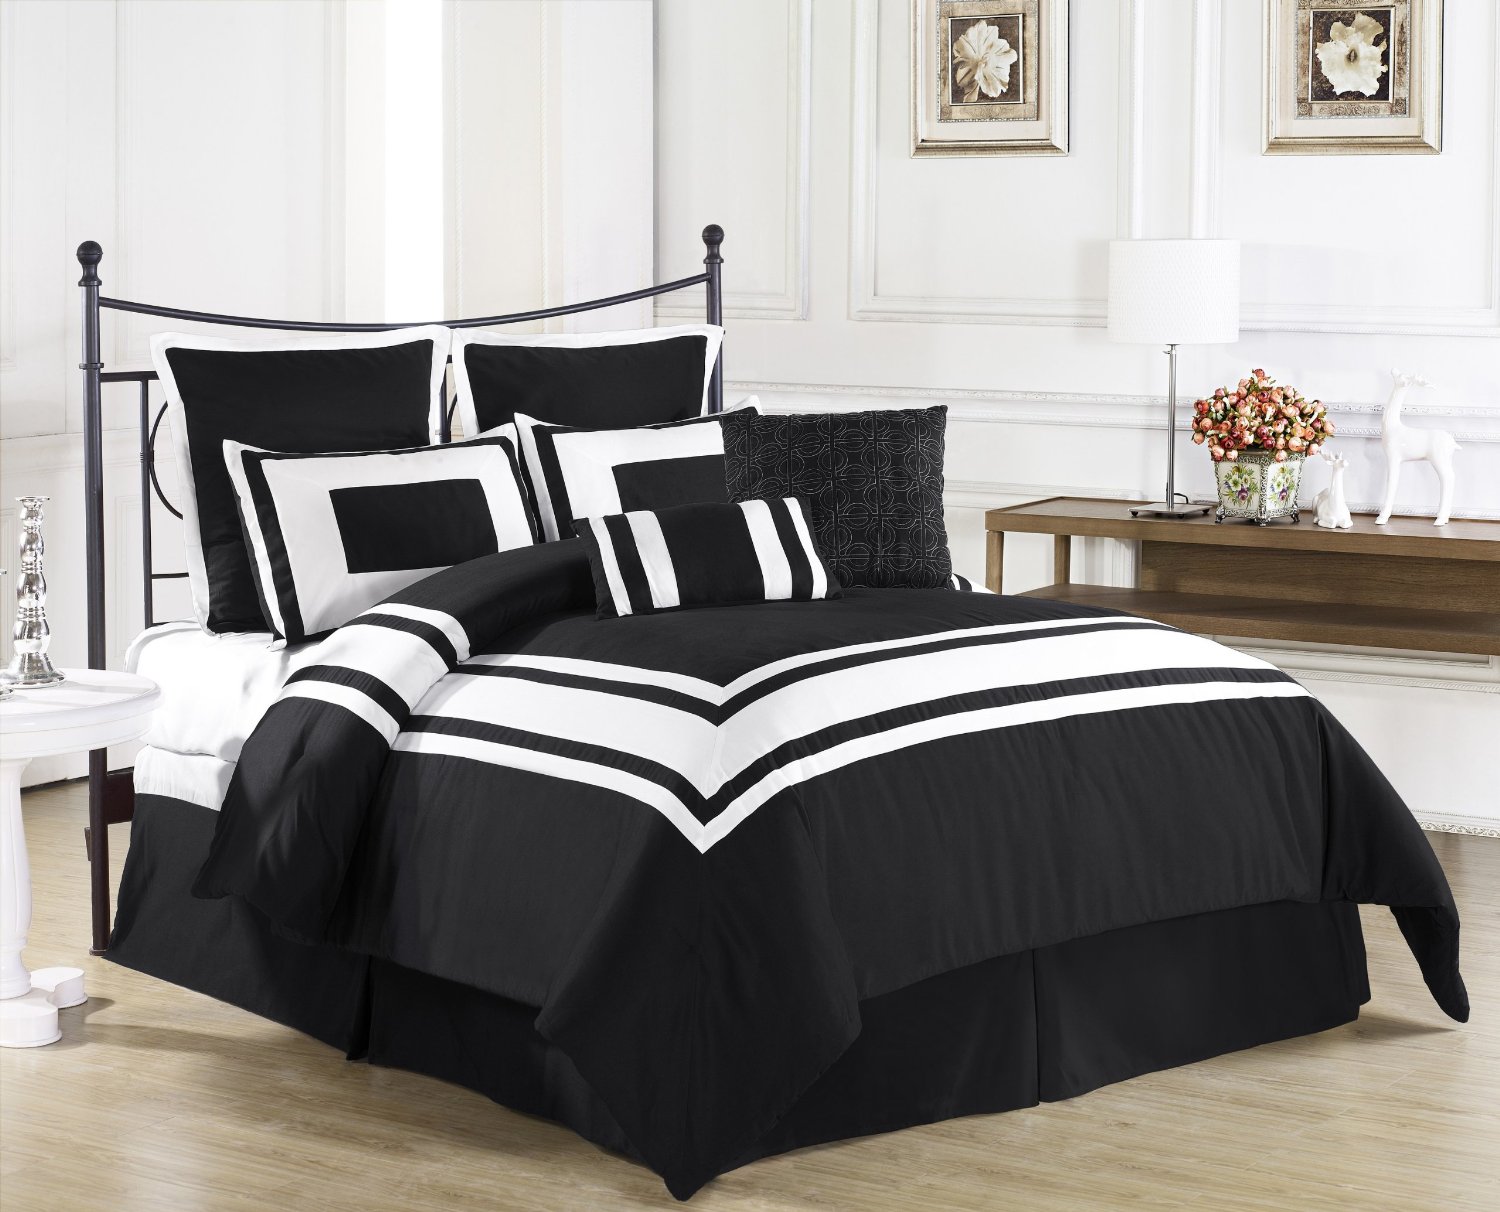 Black and White Bedding Online Shopping